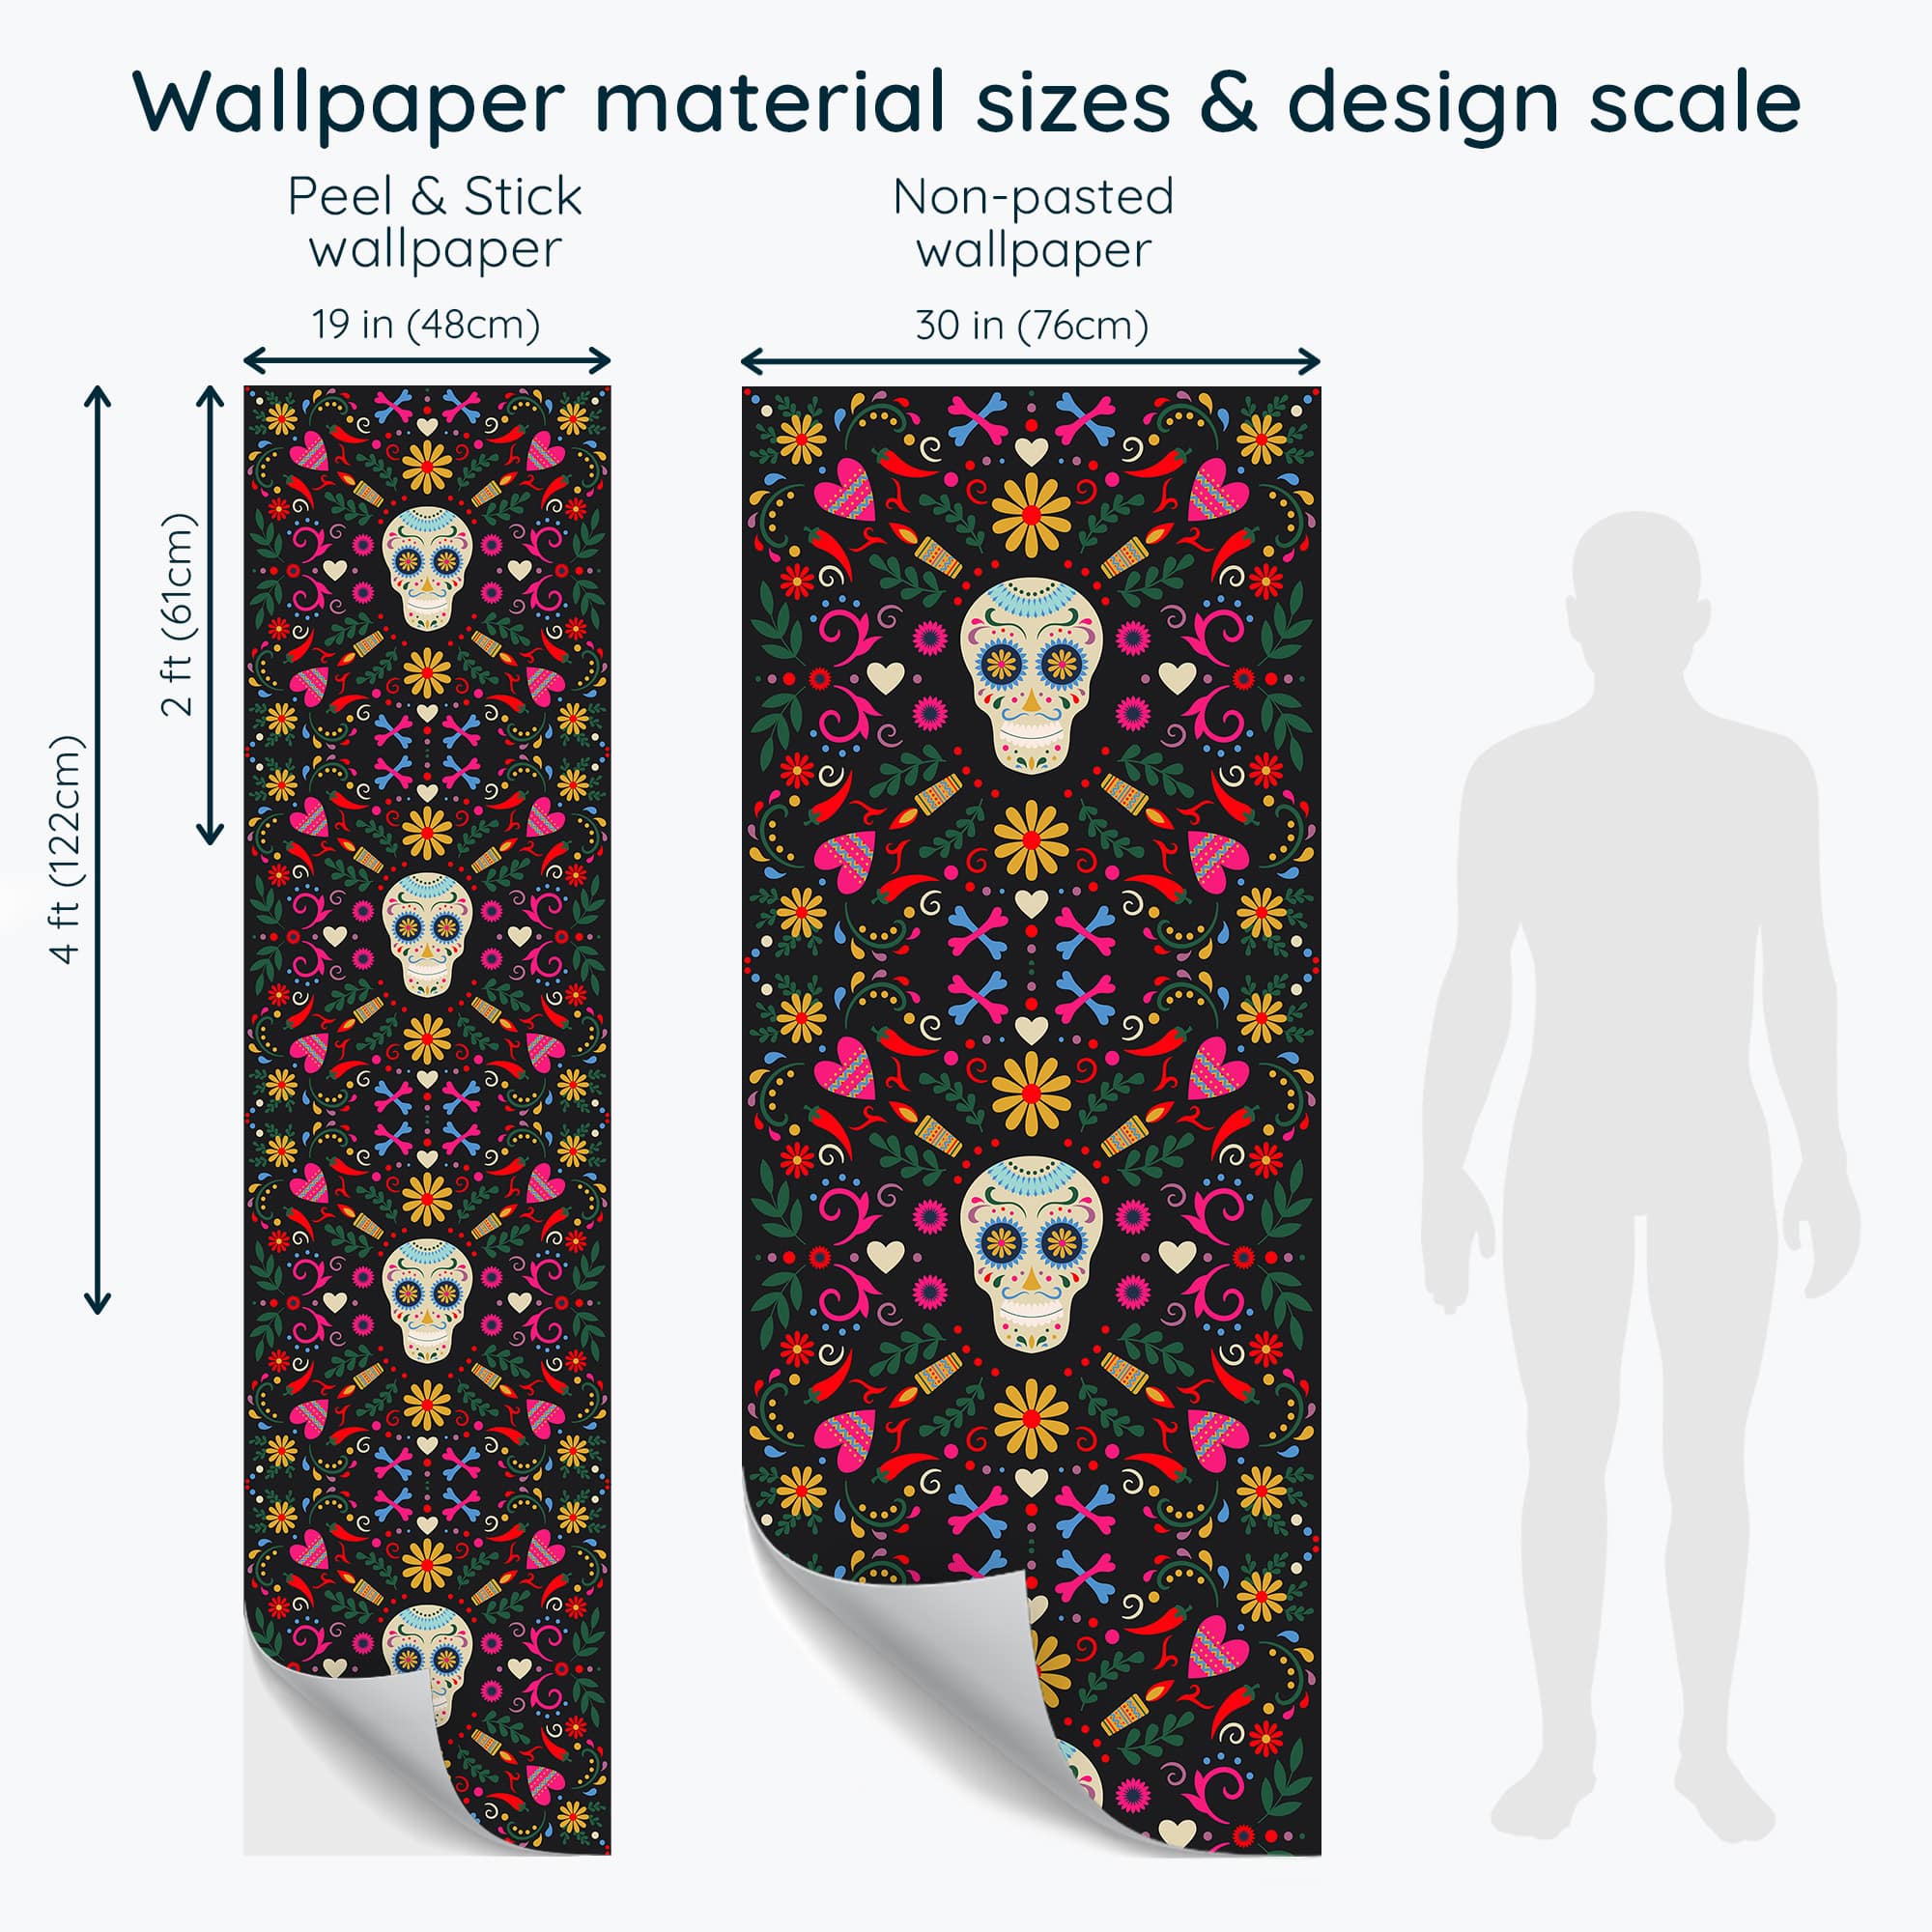 Sugar skull wallpaper - Peel and Stick or Non-Pasted